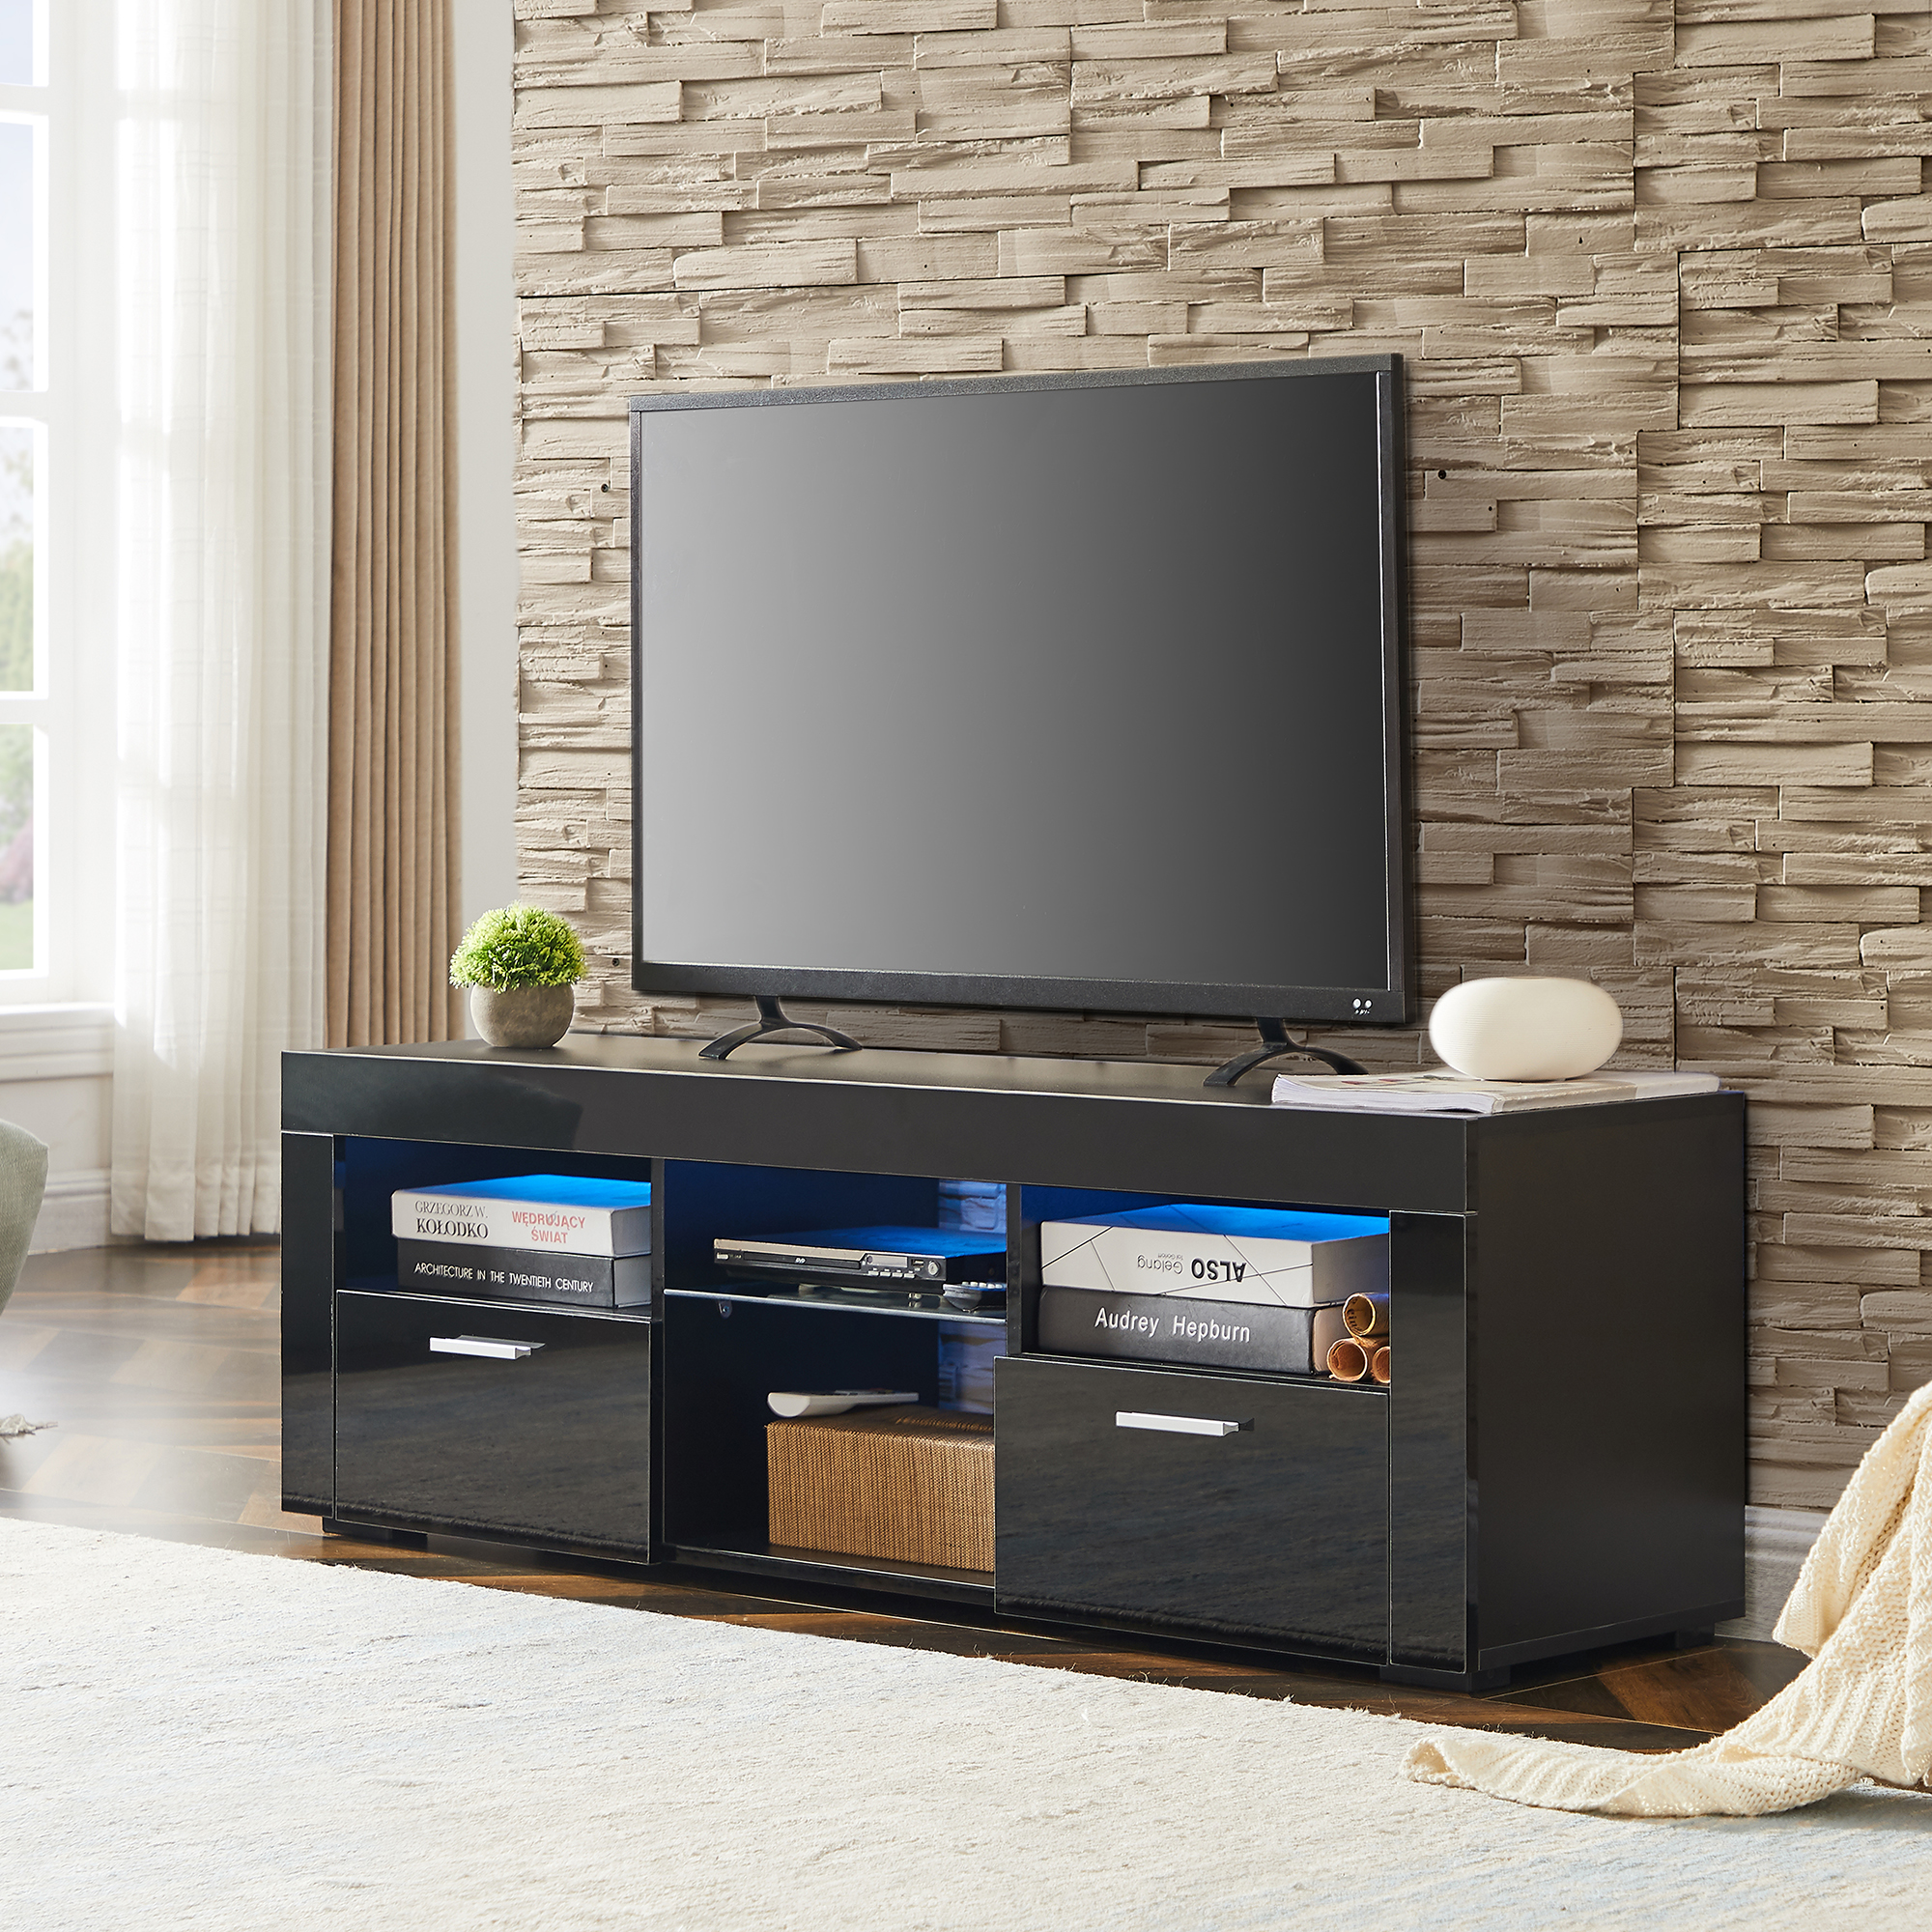 Black morden TV Stand with LED Lights,high glossy front TV Cabinet,can be assembled in Lounge Room, Living Room or Bedroom,color:Black-Boyel Living